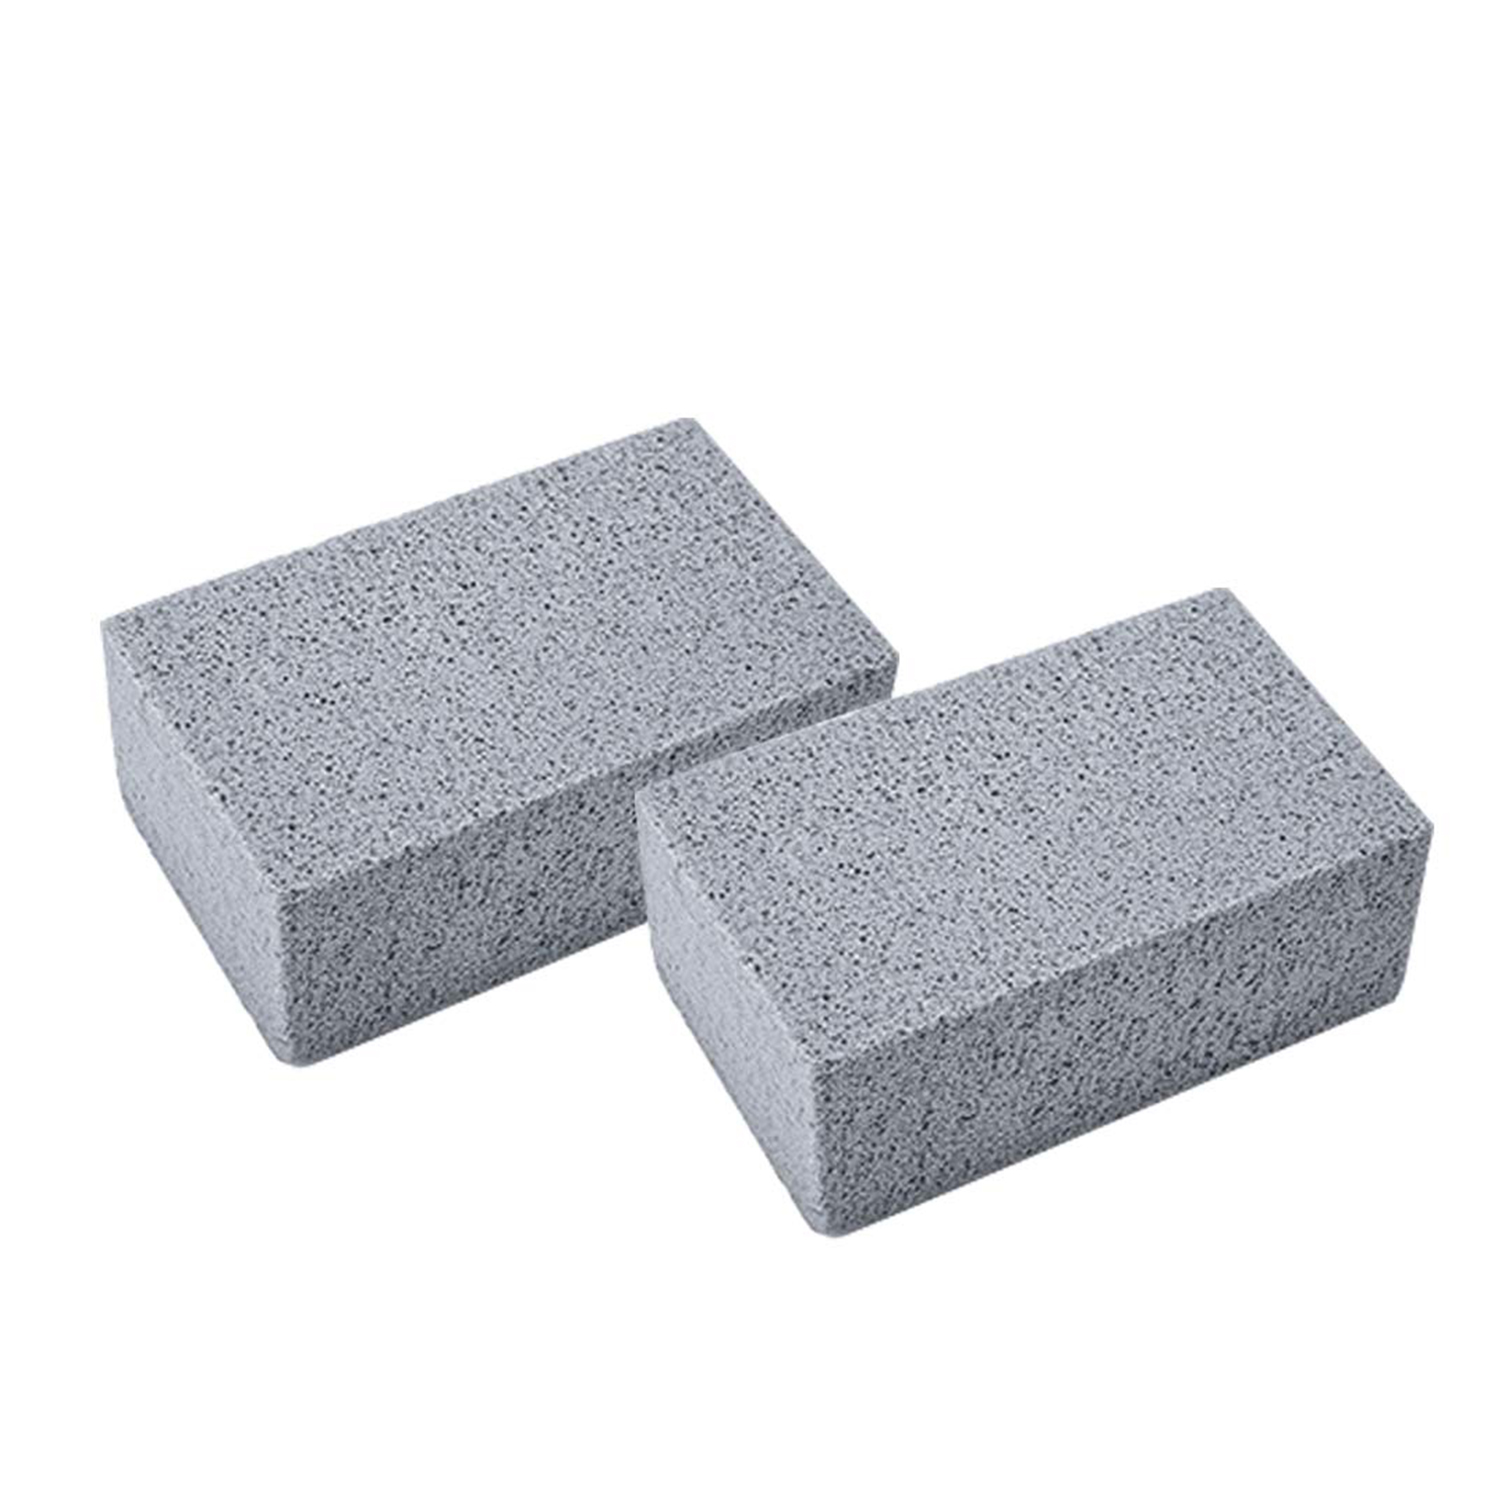 BBQ Grill Cleaning Brick Block for Removing Stains-YAOAWE